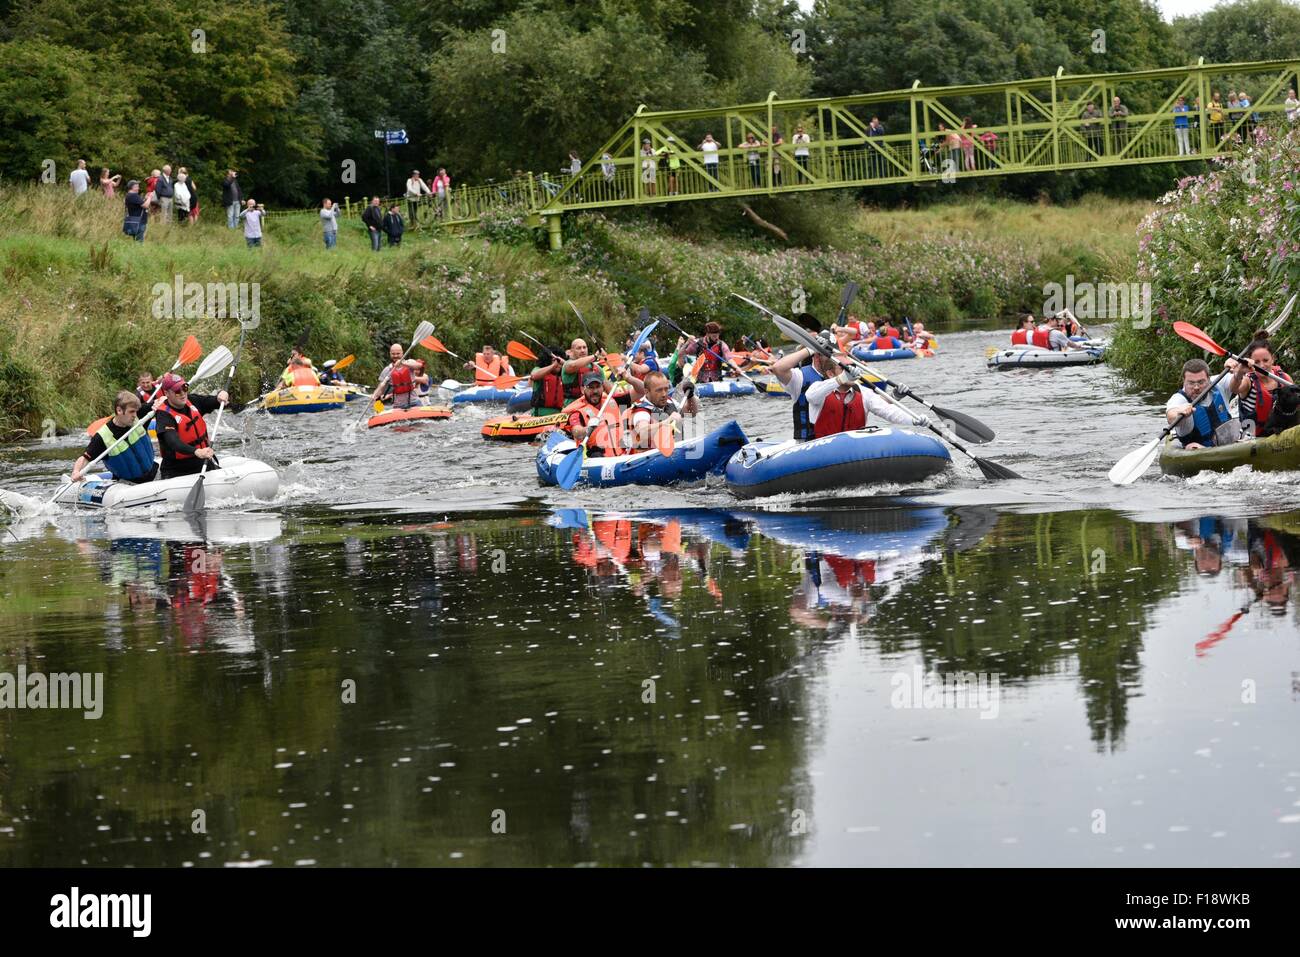 Manchester, UK  30th August 2015 The Annual Northenden Boat Race, started in 2006, goes  about a mile from Simon's Bridge, Didsbury along the River Mersey to Northenden Bridge. This year there are two categories, one for canoes and kayaks, the other for dinghies. A fun event to raise money for The Christie Hospital, it has a competitive edge, with a trophy awarded to the winners of each category. Northenden Boat Race 2015  Manchester, UK Credit:  John Fryer/Alamy Live News Stock Photo